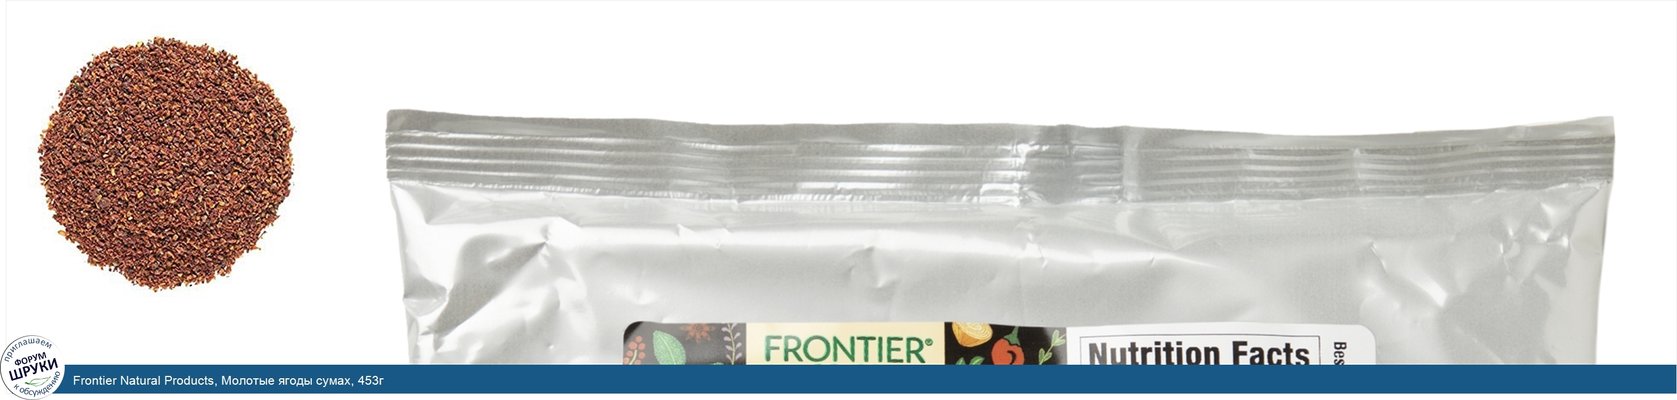 Frontier Natural Products, Молотые ягоды сумах, 453г